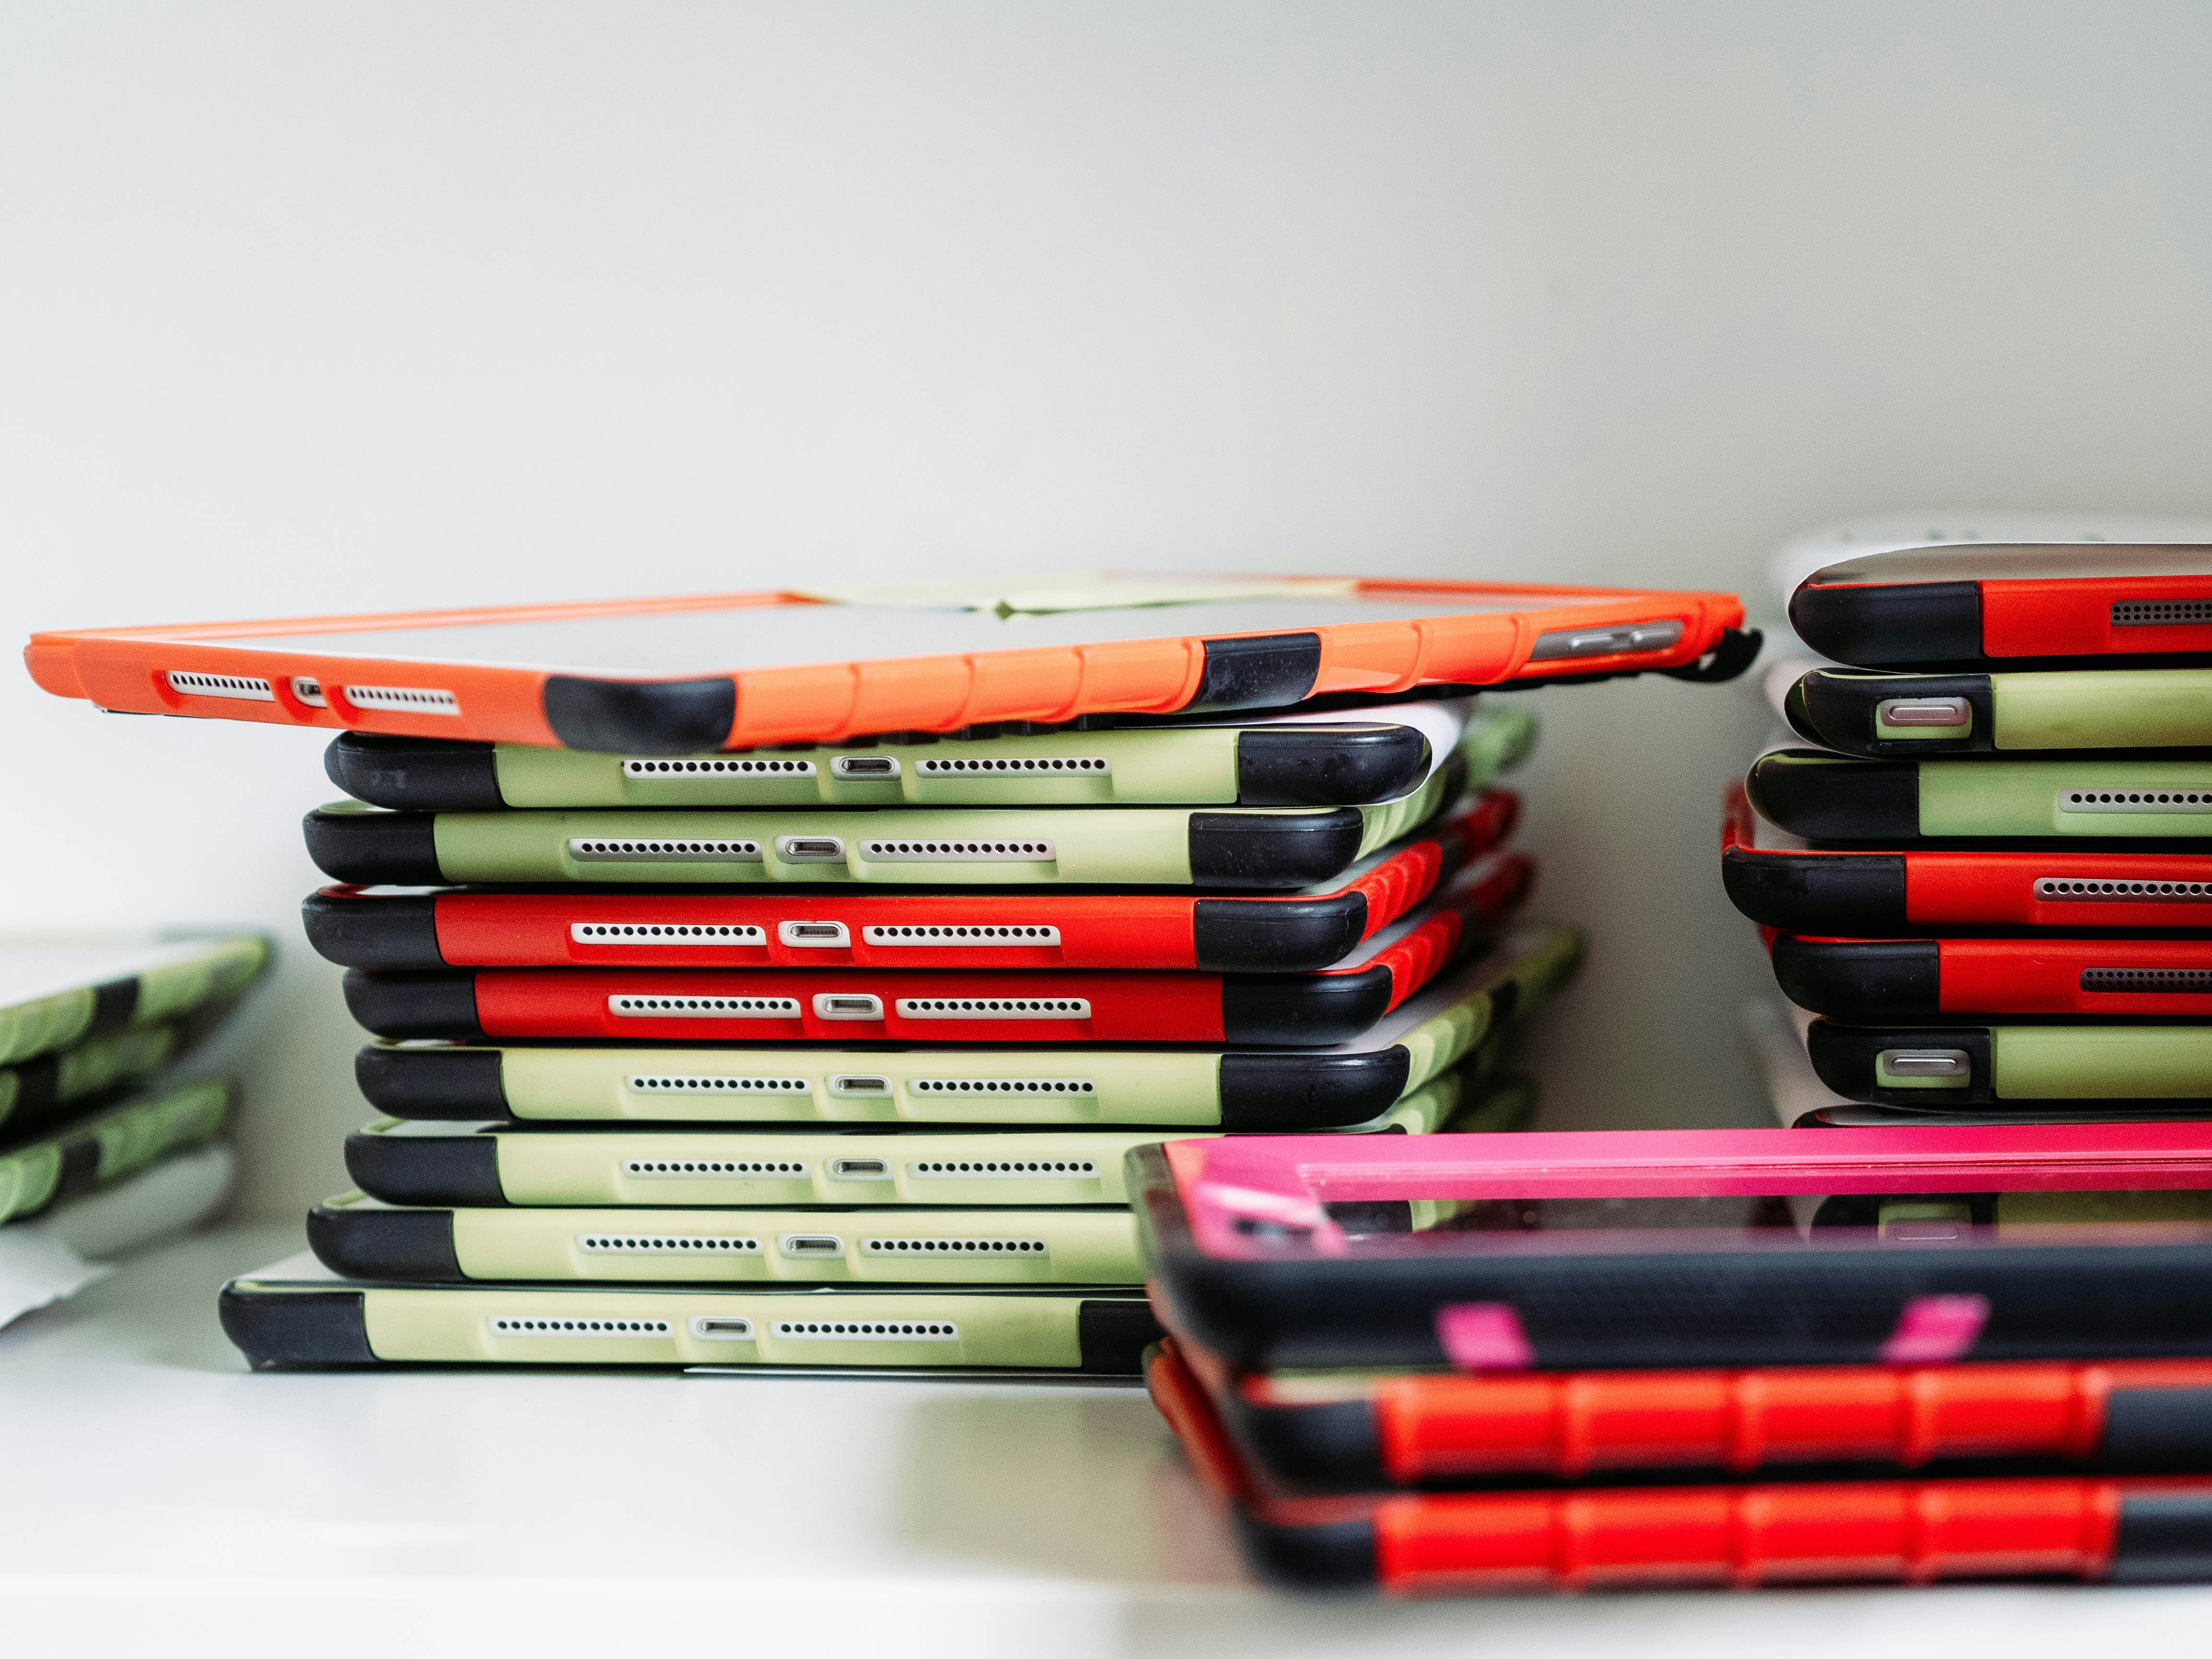 iPads used by students in school classrooms.